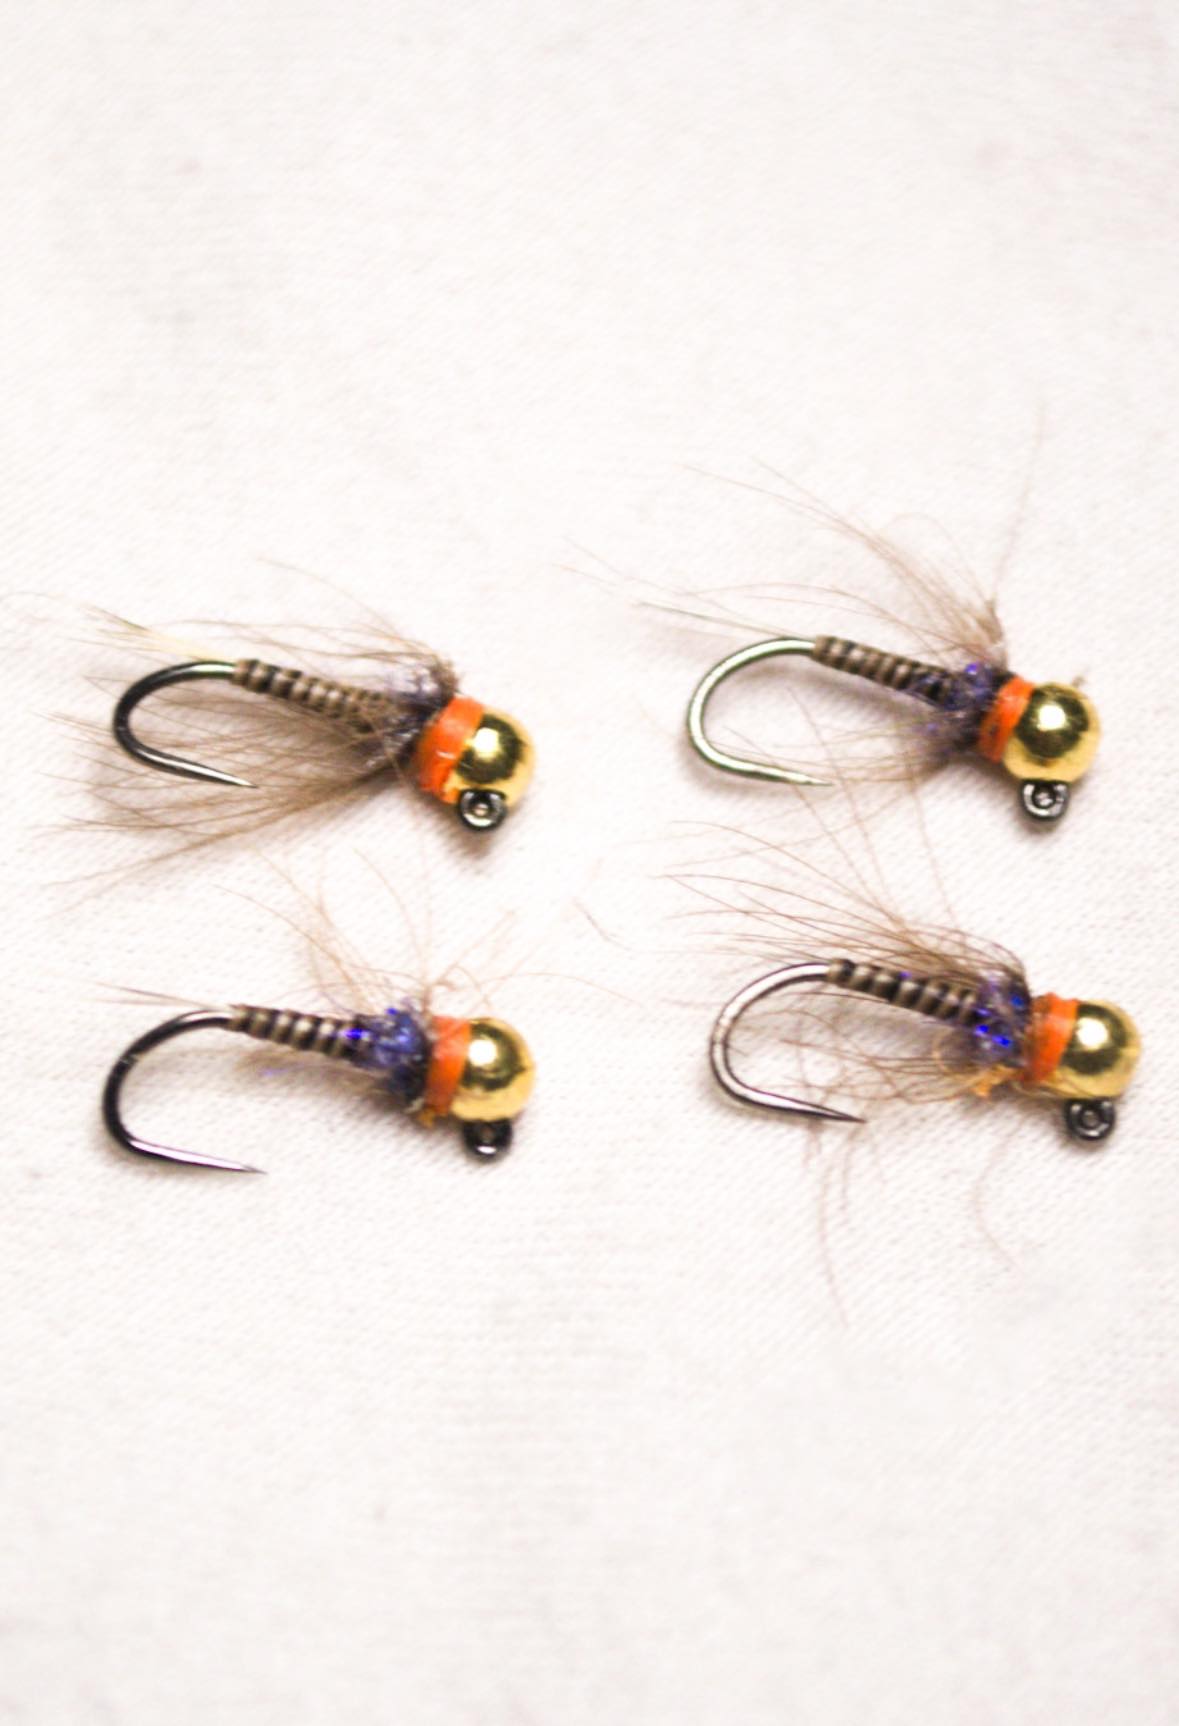 Barbless euronymph jig (price for 12 flies) – Anglers Diet